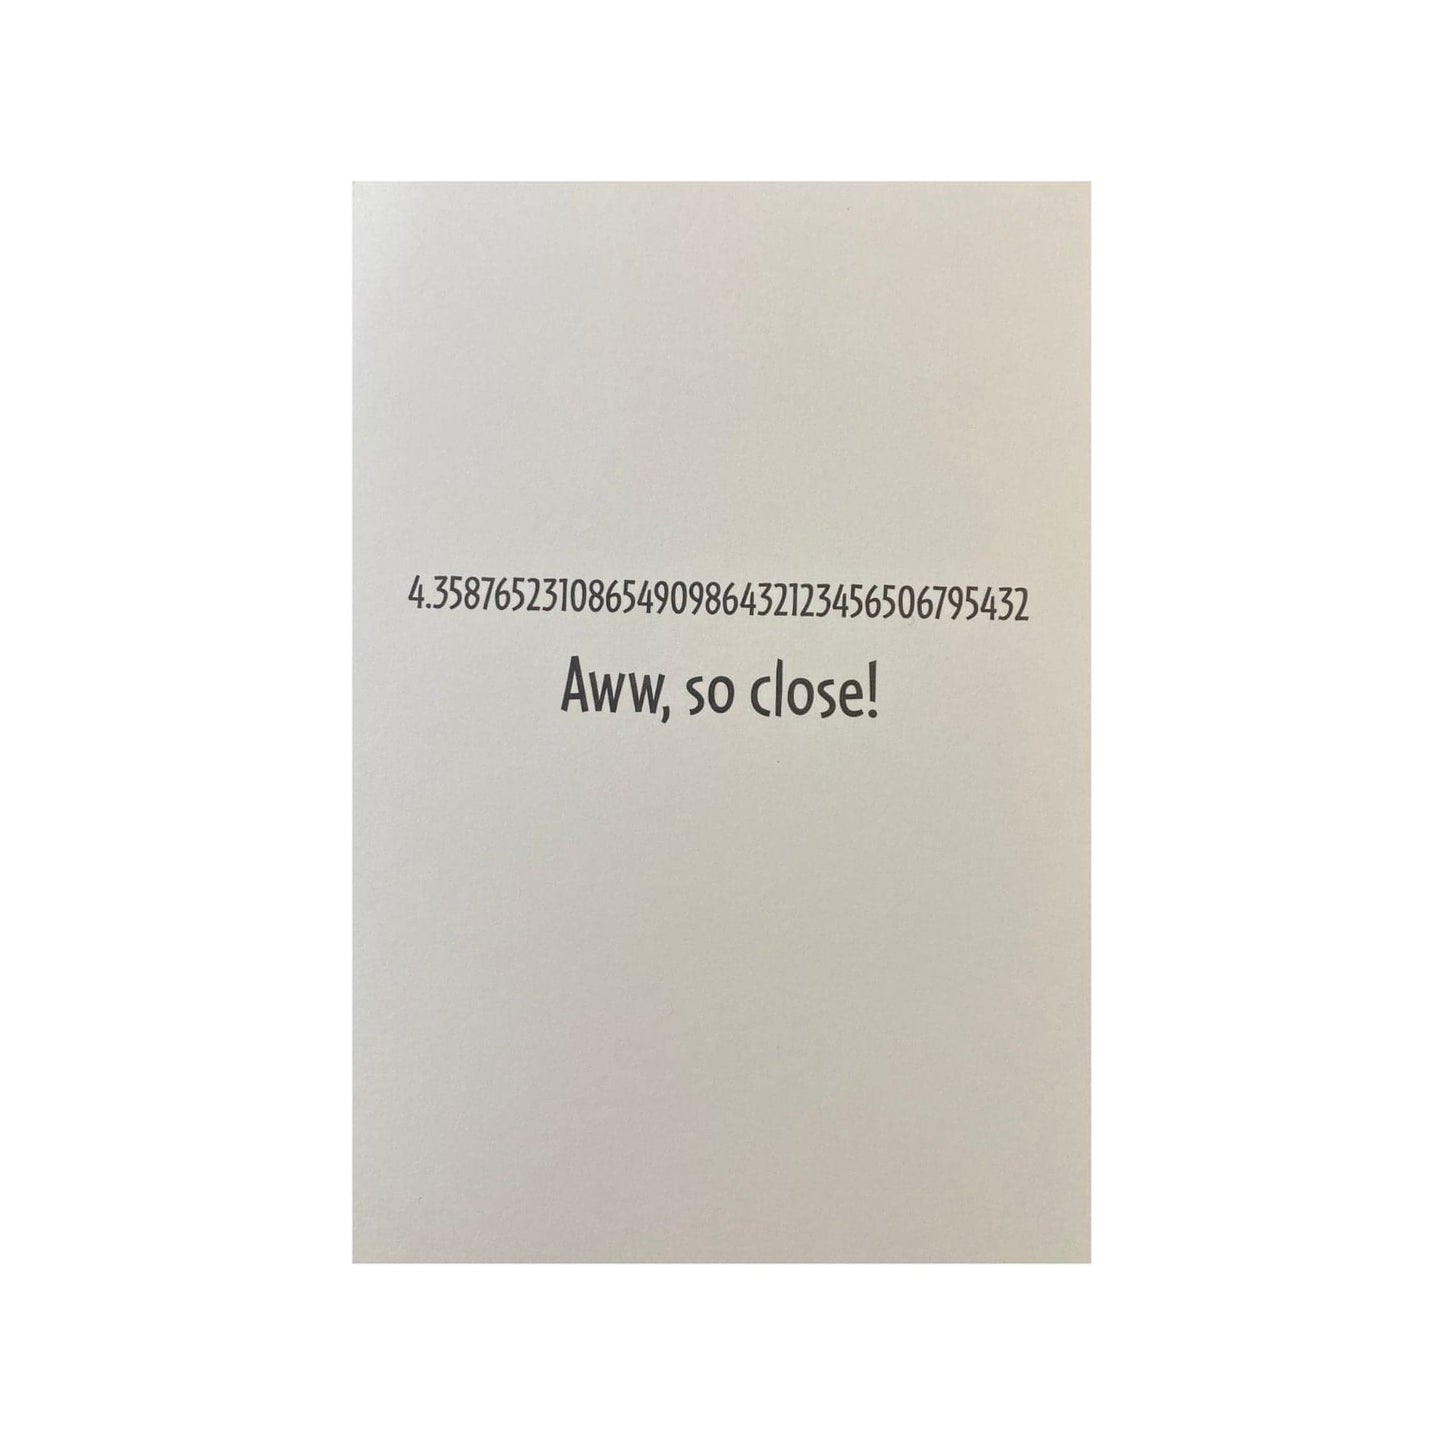 Hallmark-Birthday Card with Envelope - Heartline by Hallmark - "IF YOU CAN GUESS THE NUMBER" - Brandat Outlet